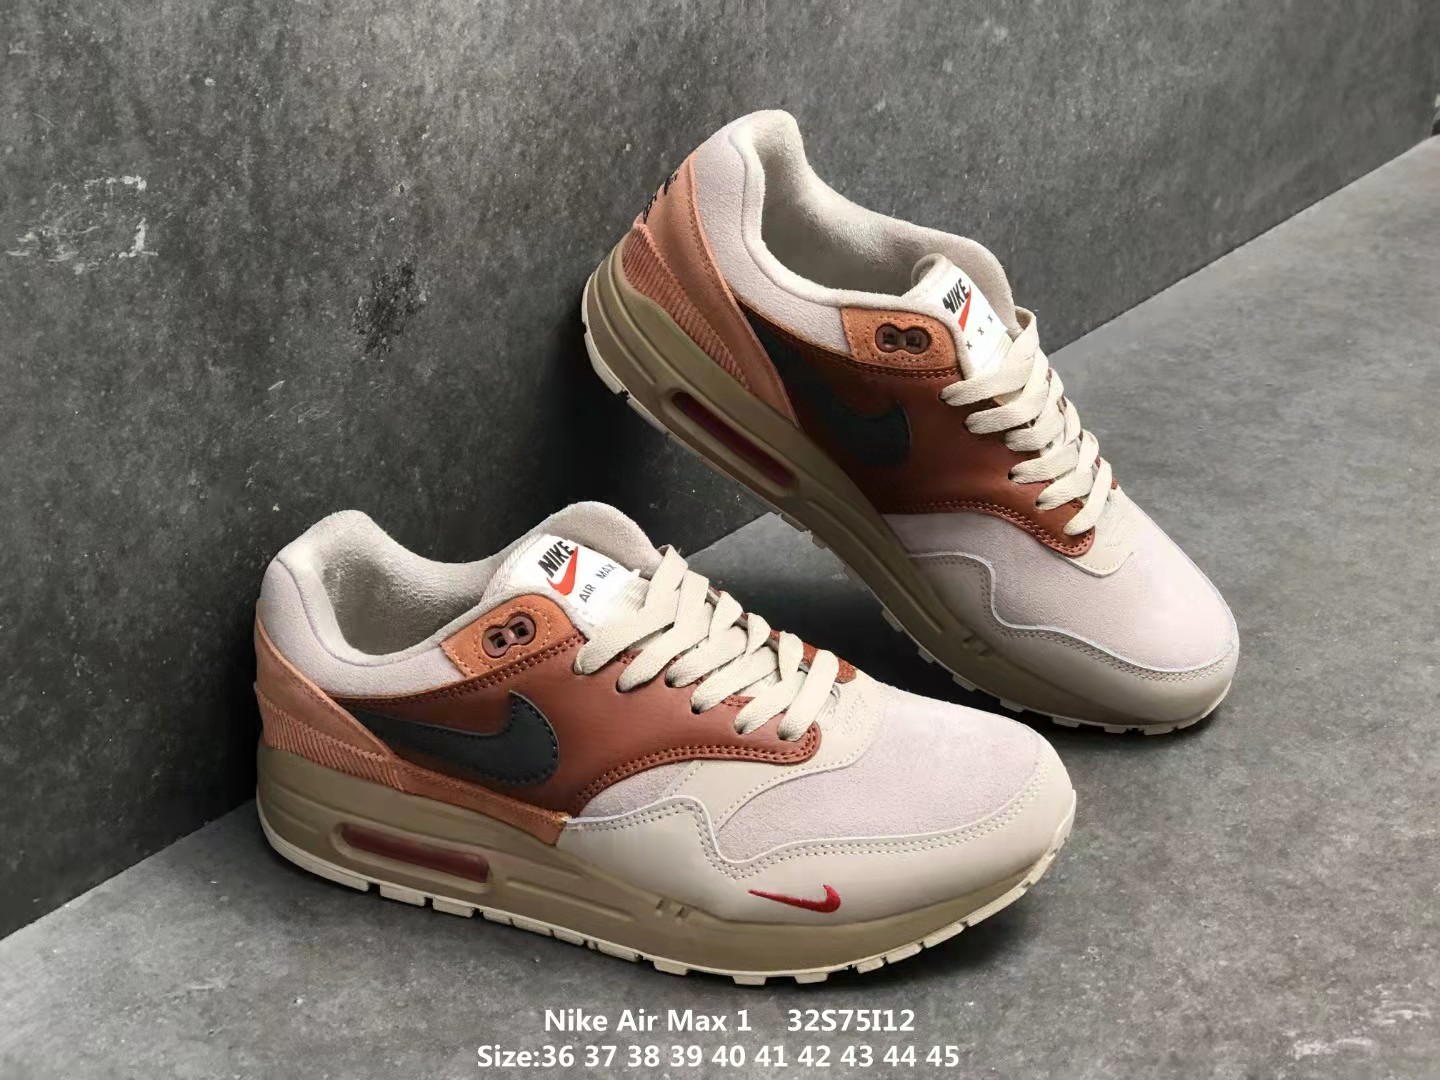 Nike Air Max 1 Tinker Sketch To Shelf Beign Brown Red Shoes